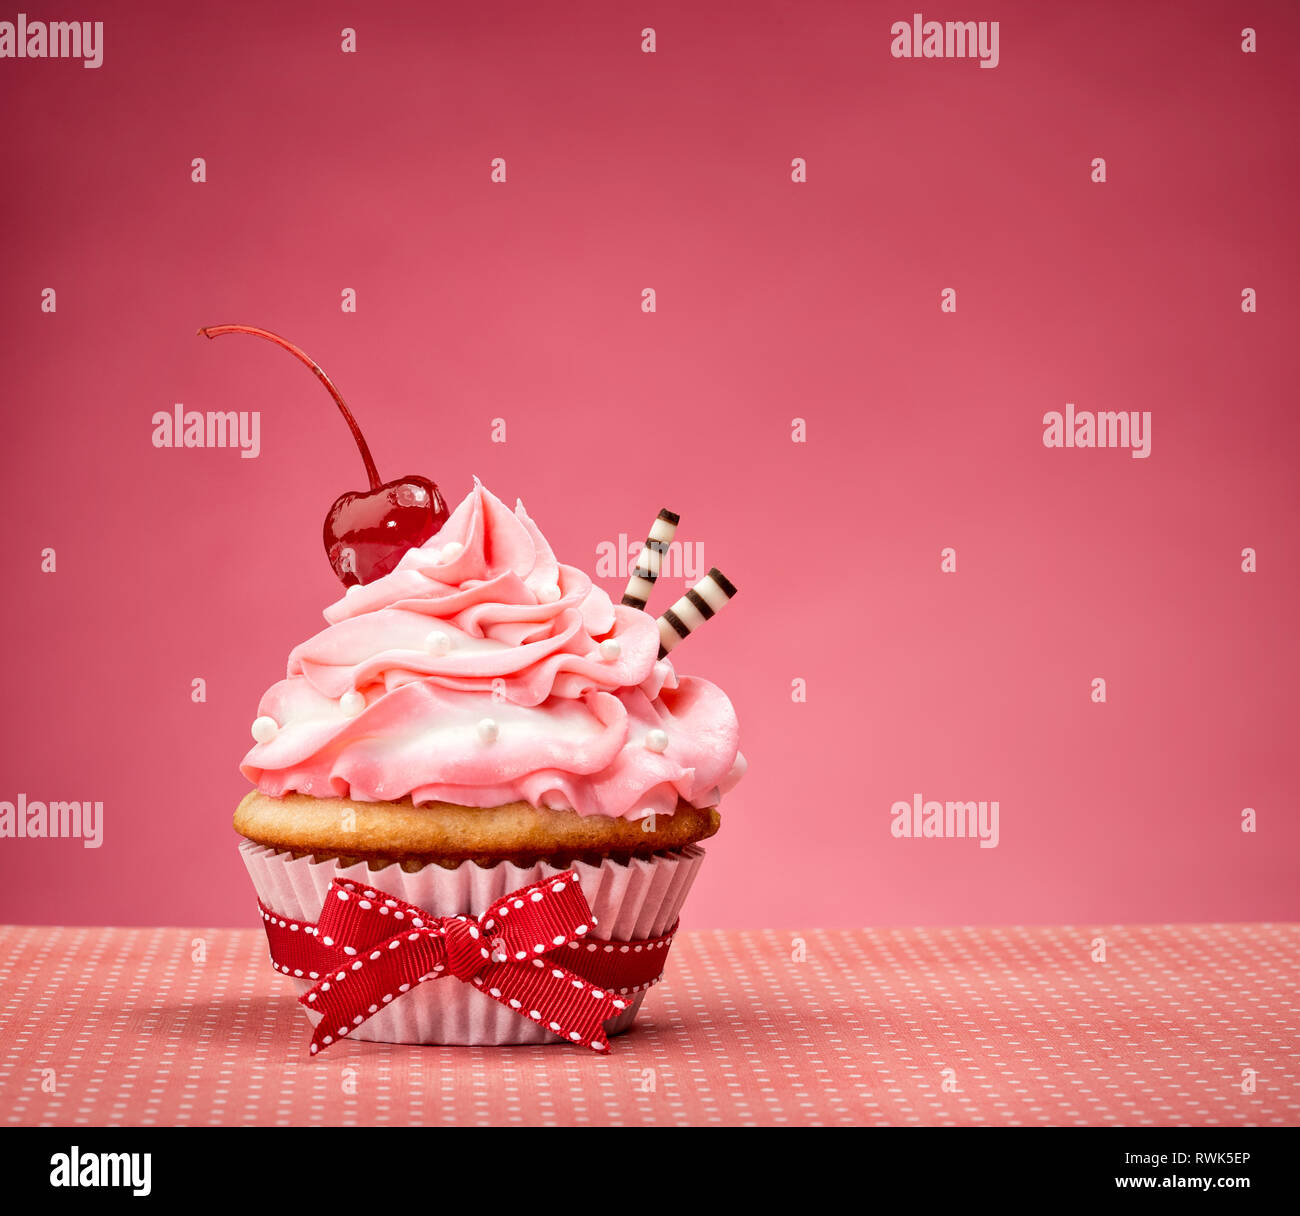 Cupcake with pink buttercream icing and a cherry on top. Stock Photo